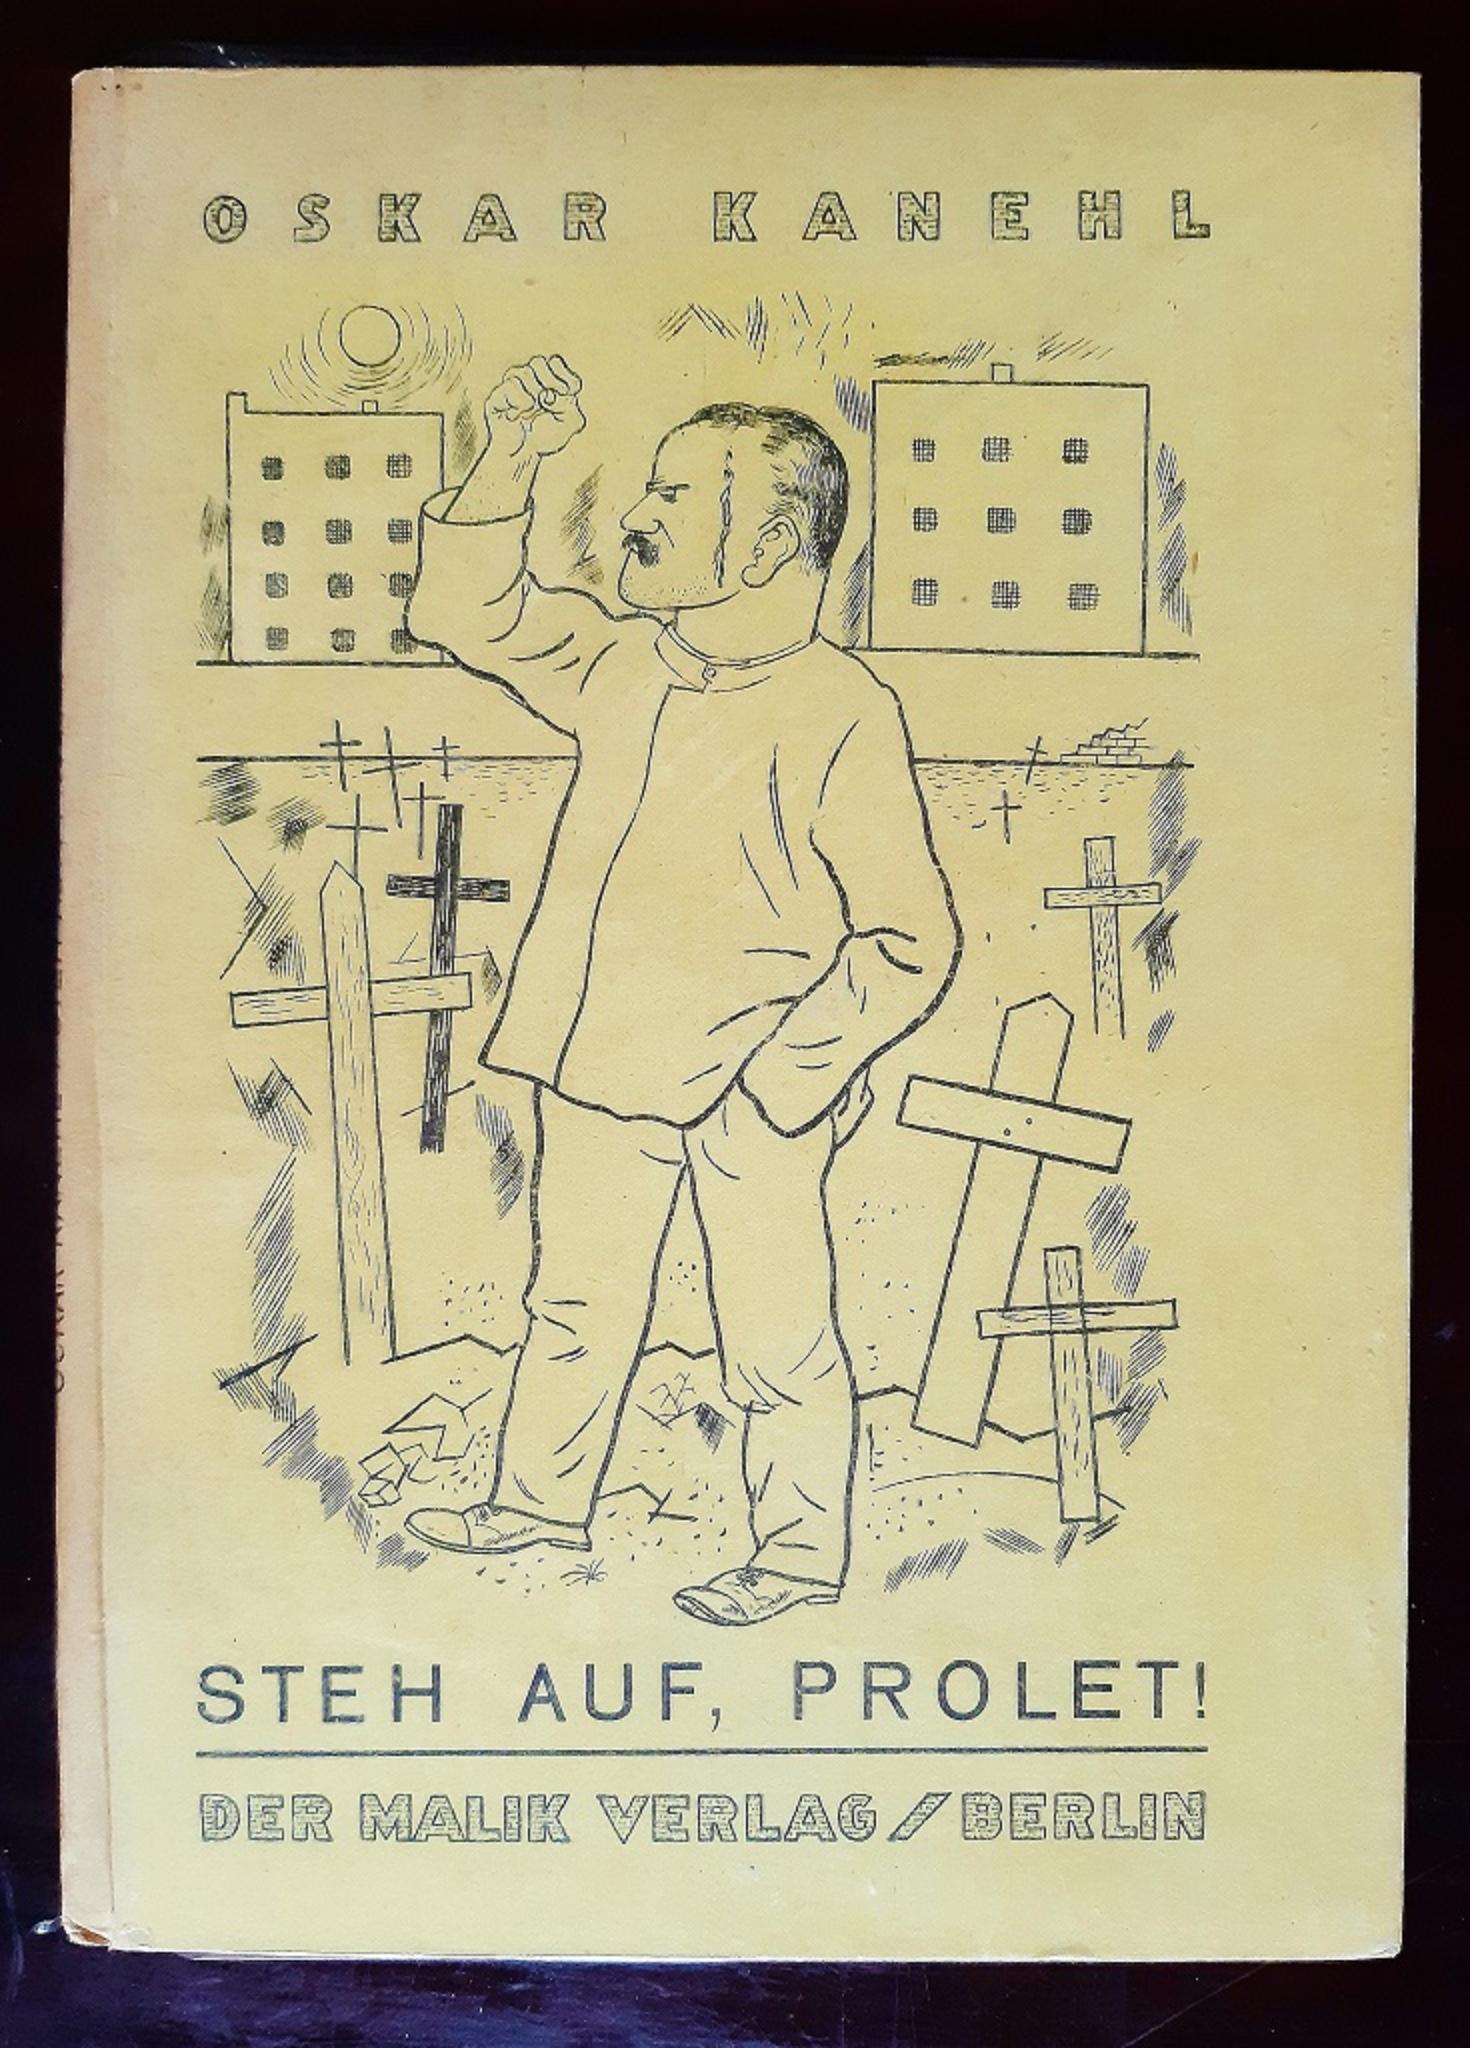 Steh auf prolet! is an original modern rare book engraved by George Grosz (Berlin, 1823 - 1959, Berlin) and written by Oskar Kanehl (Berlin, 1888 - Berlin, 1929) in 1922.

Original First Illustrated Edition.

Published by Malik Verlag,